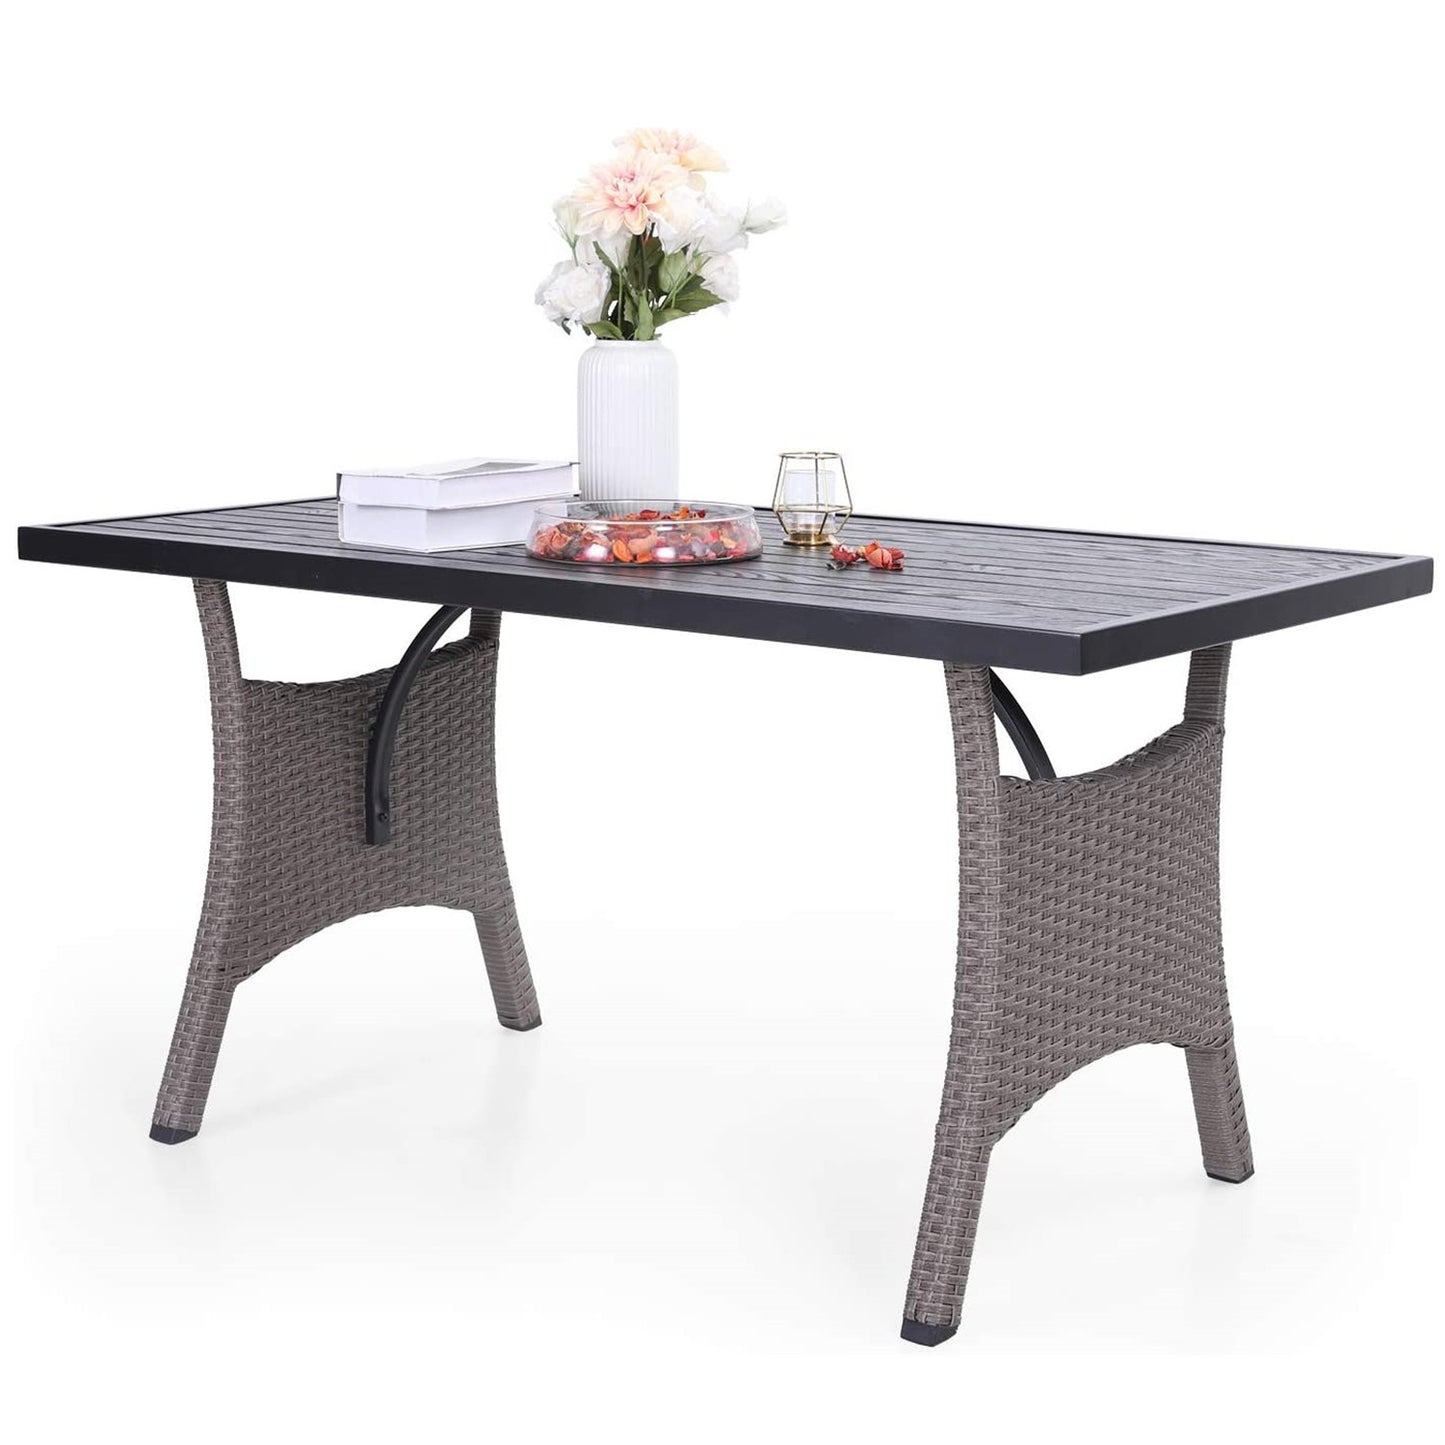 Sophia & William Patio Wicker Rectangular Dining Table for 6 Chairs